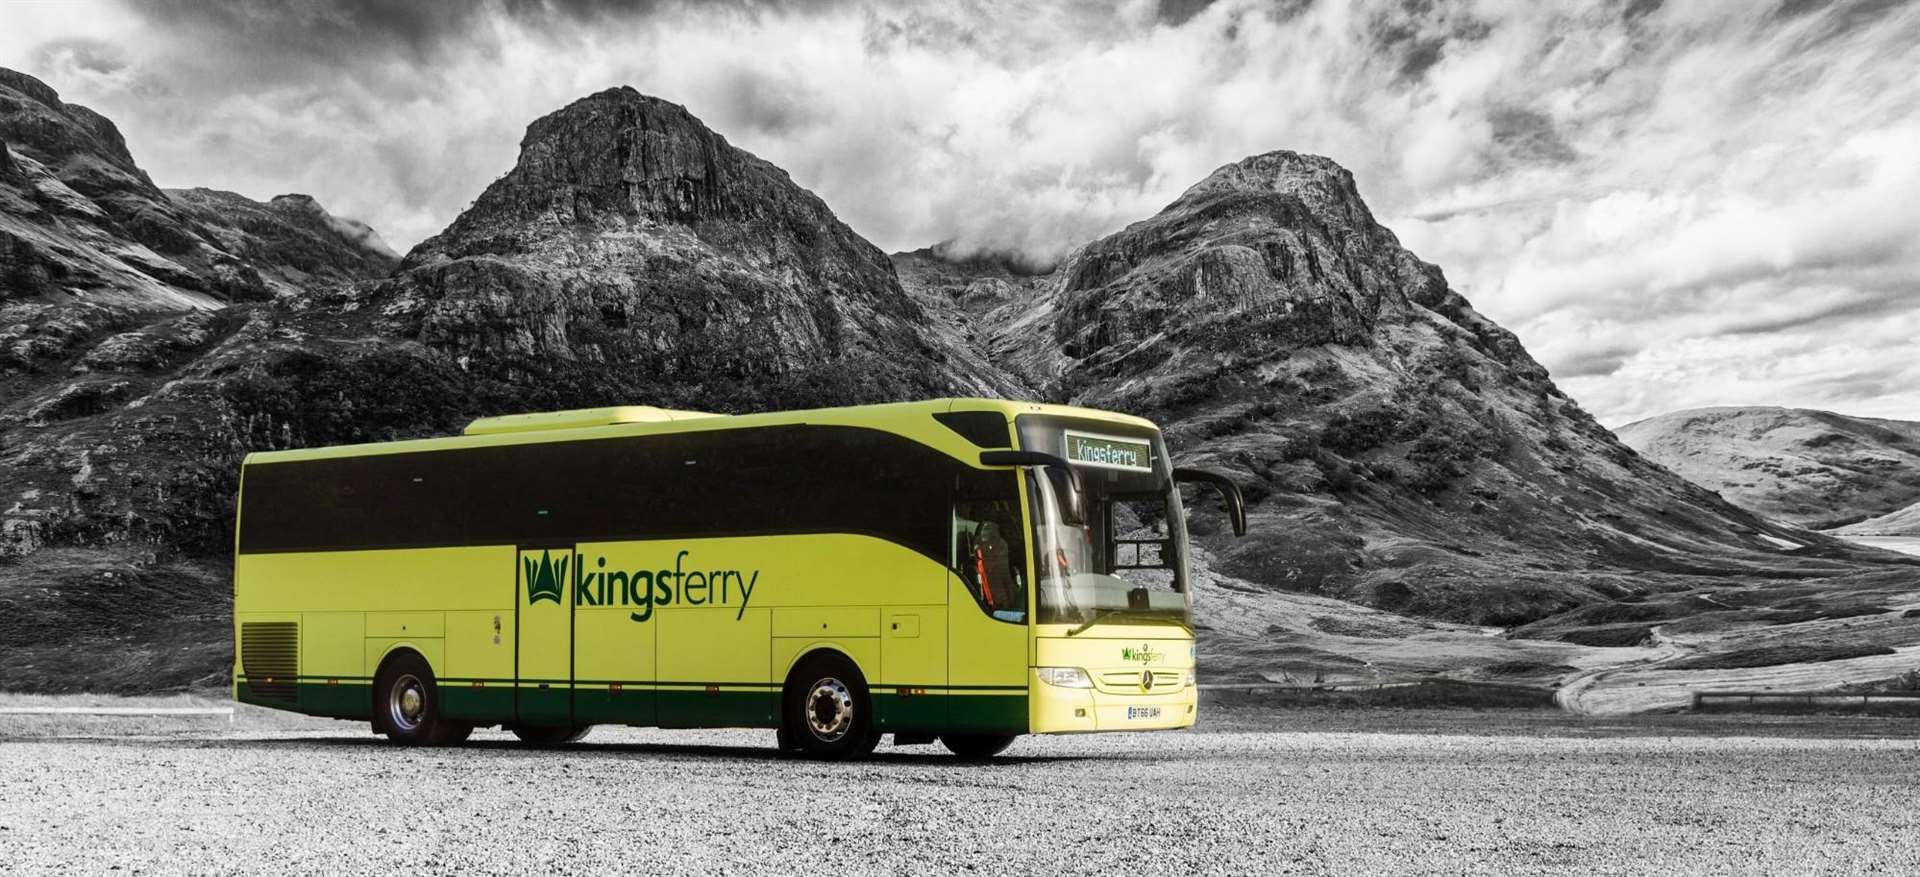 Ever considered a career as a coach driver? Then hop on board The Kings Ferry.